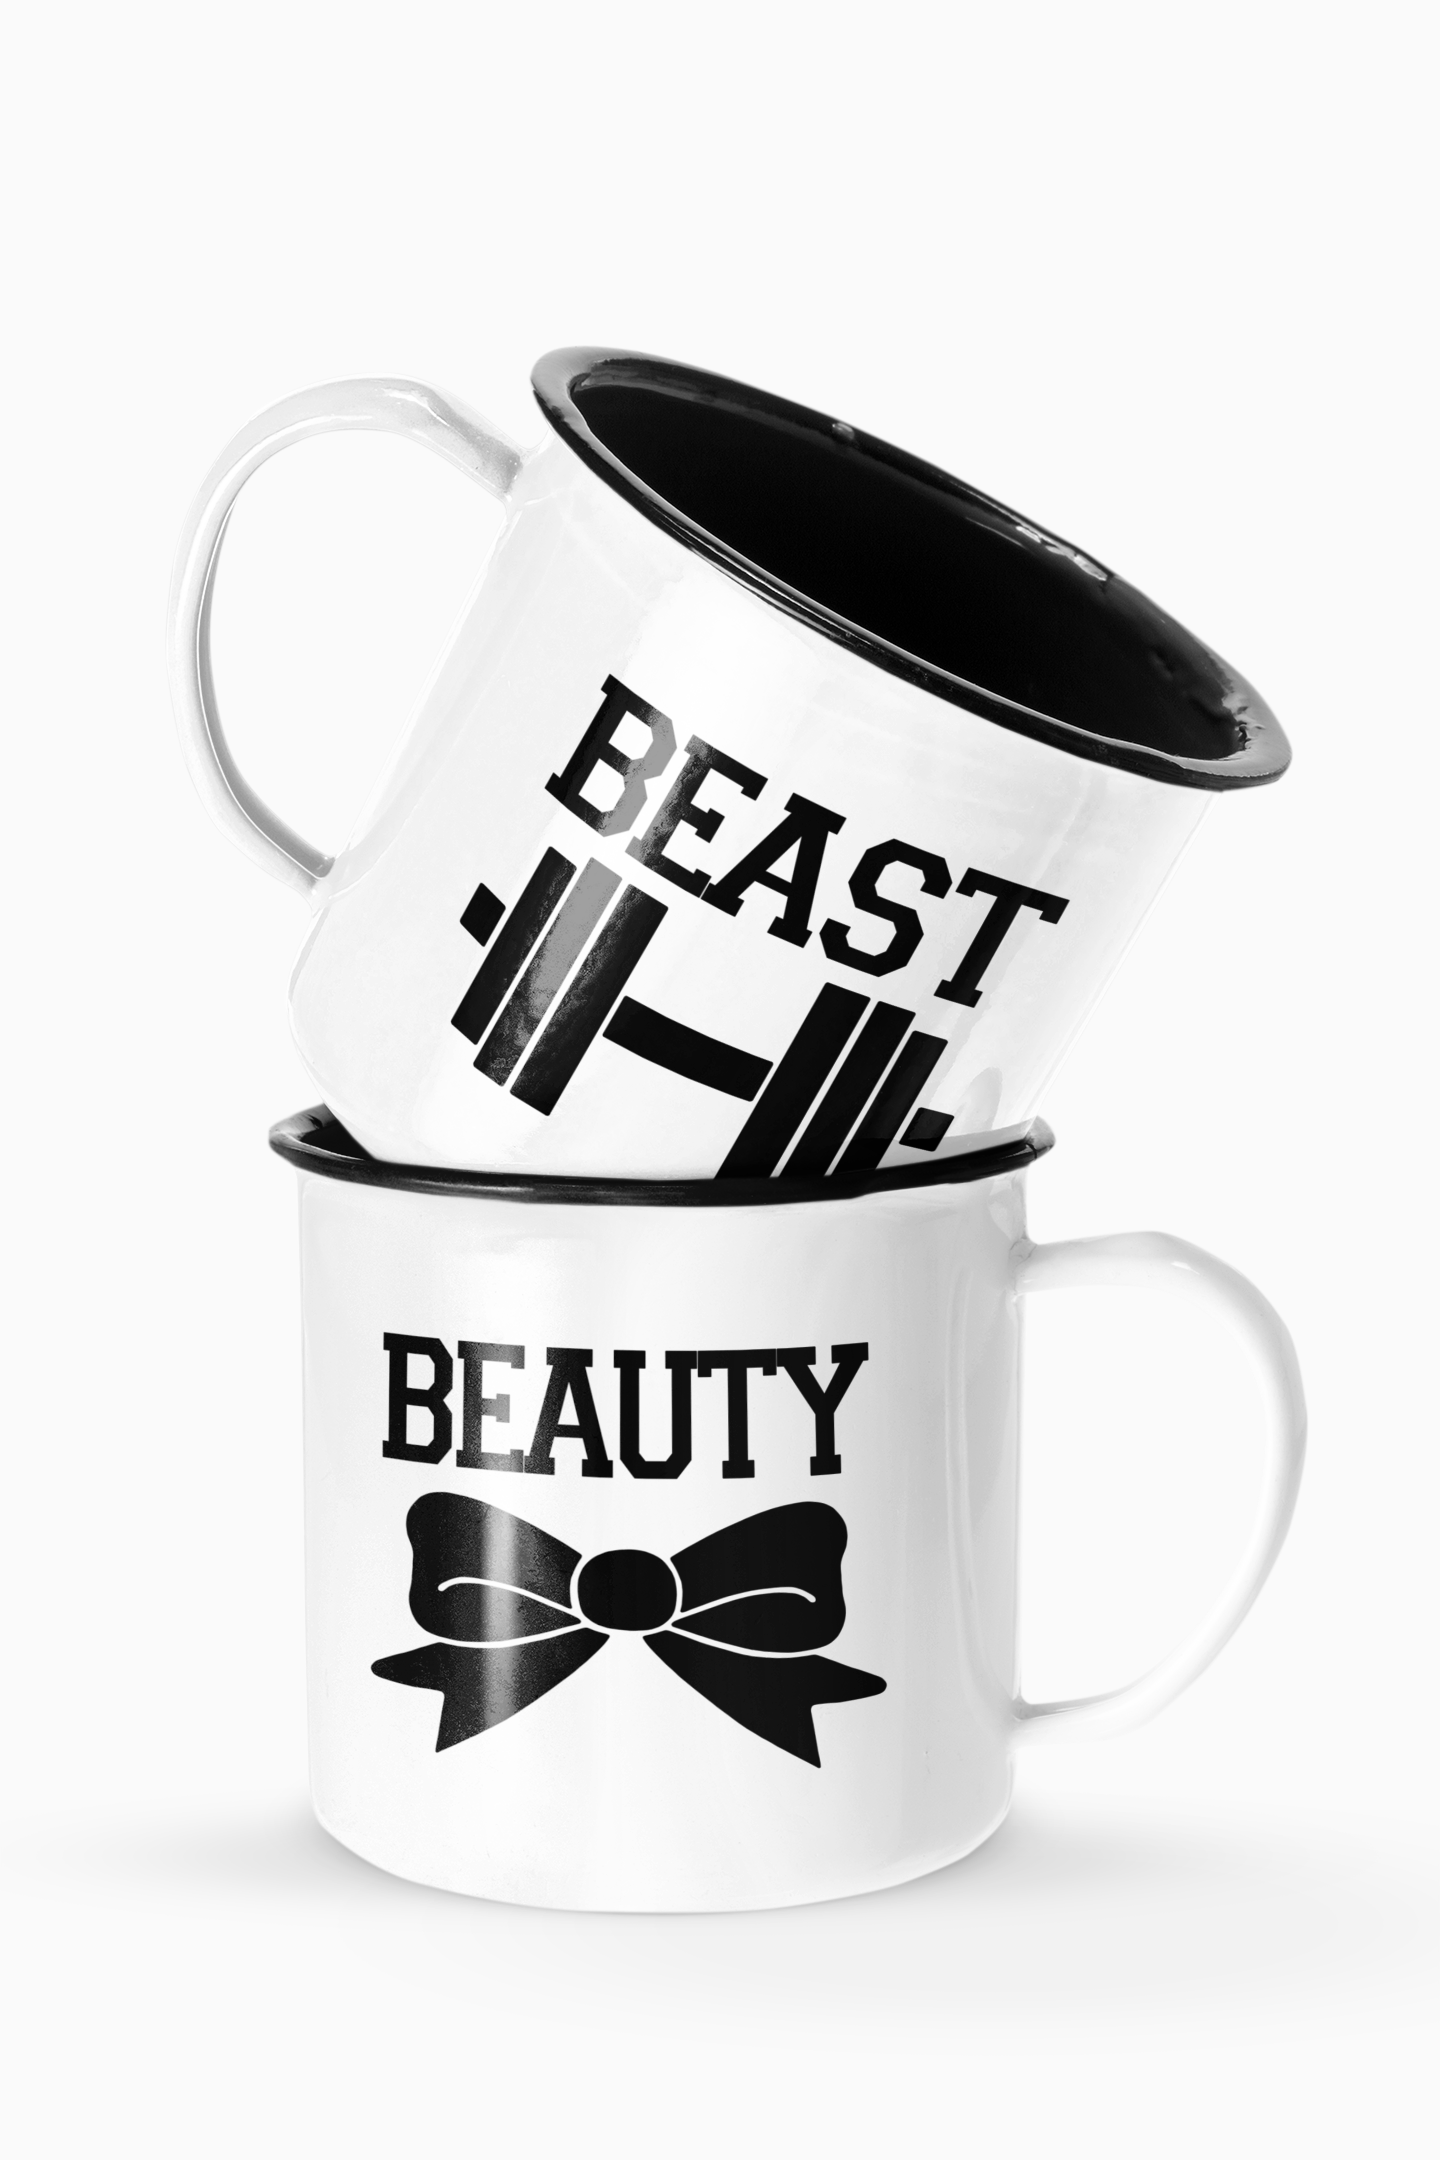 Beauty And Beast Couples Enamel Camp Cup Set Wedding Enamel Couples Gift